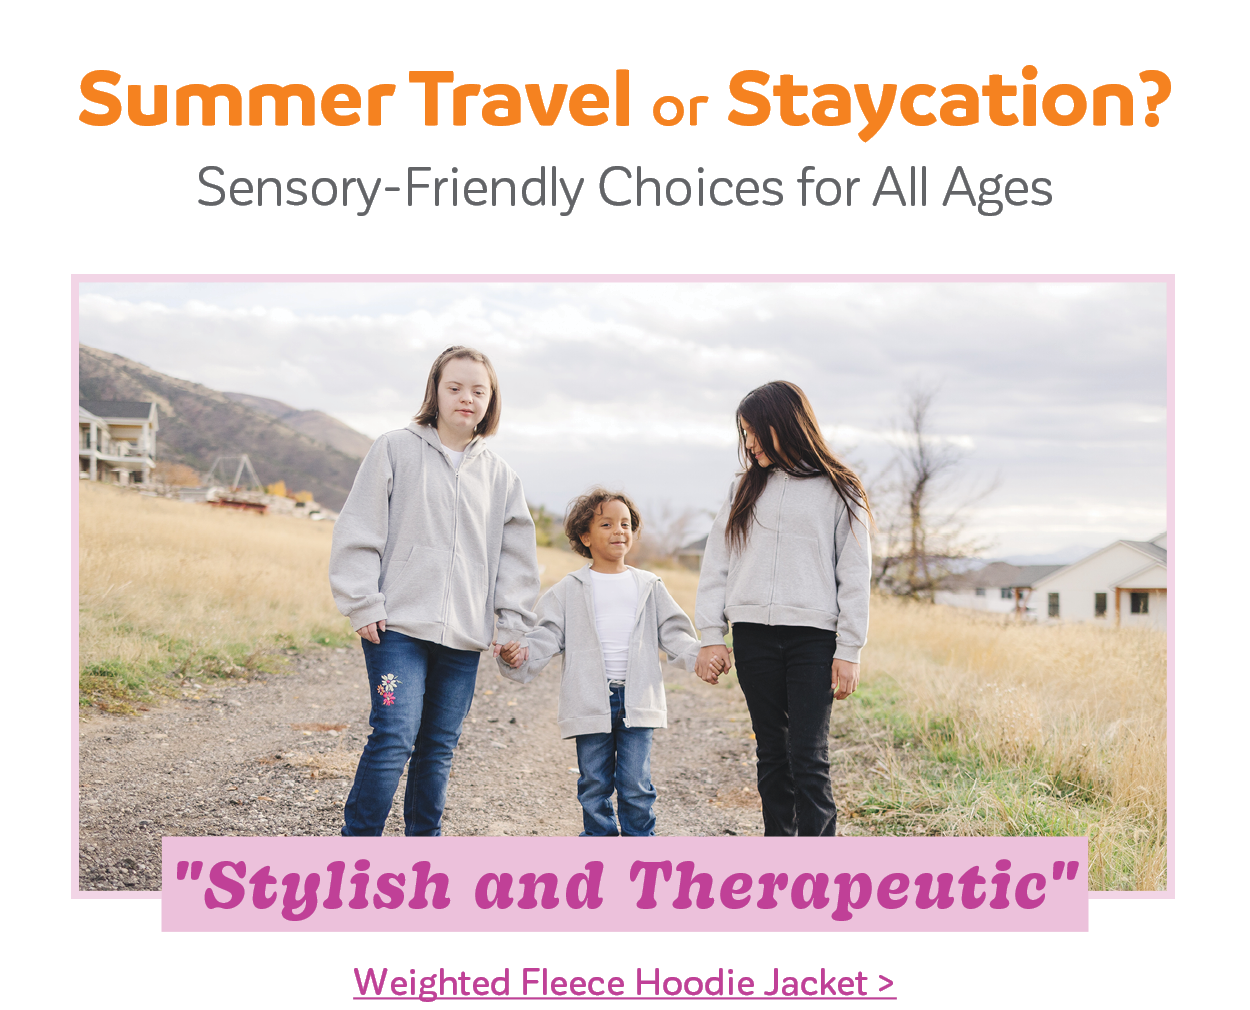 Summer Travel or Staycation? Sensory-Friendly Choices for All Ages.